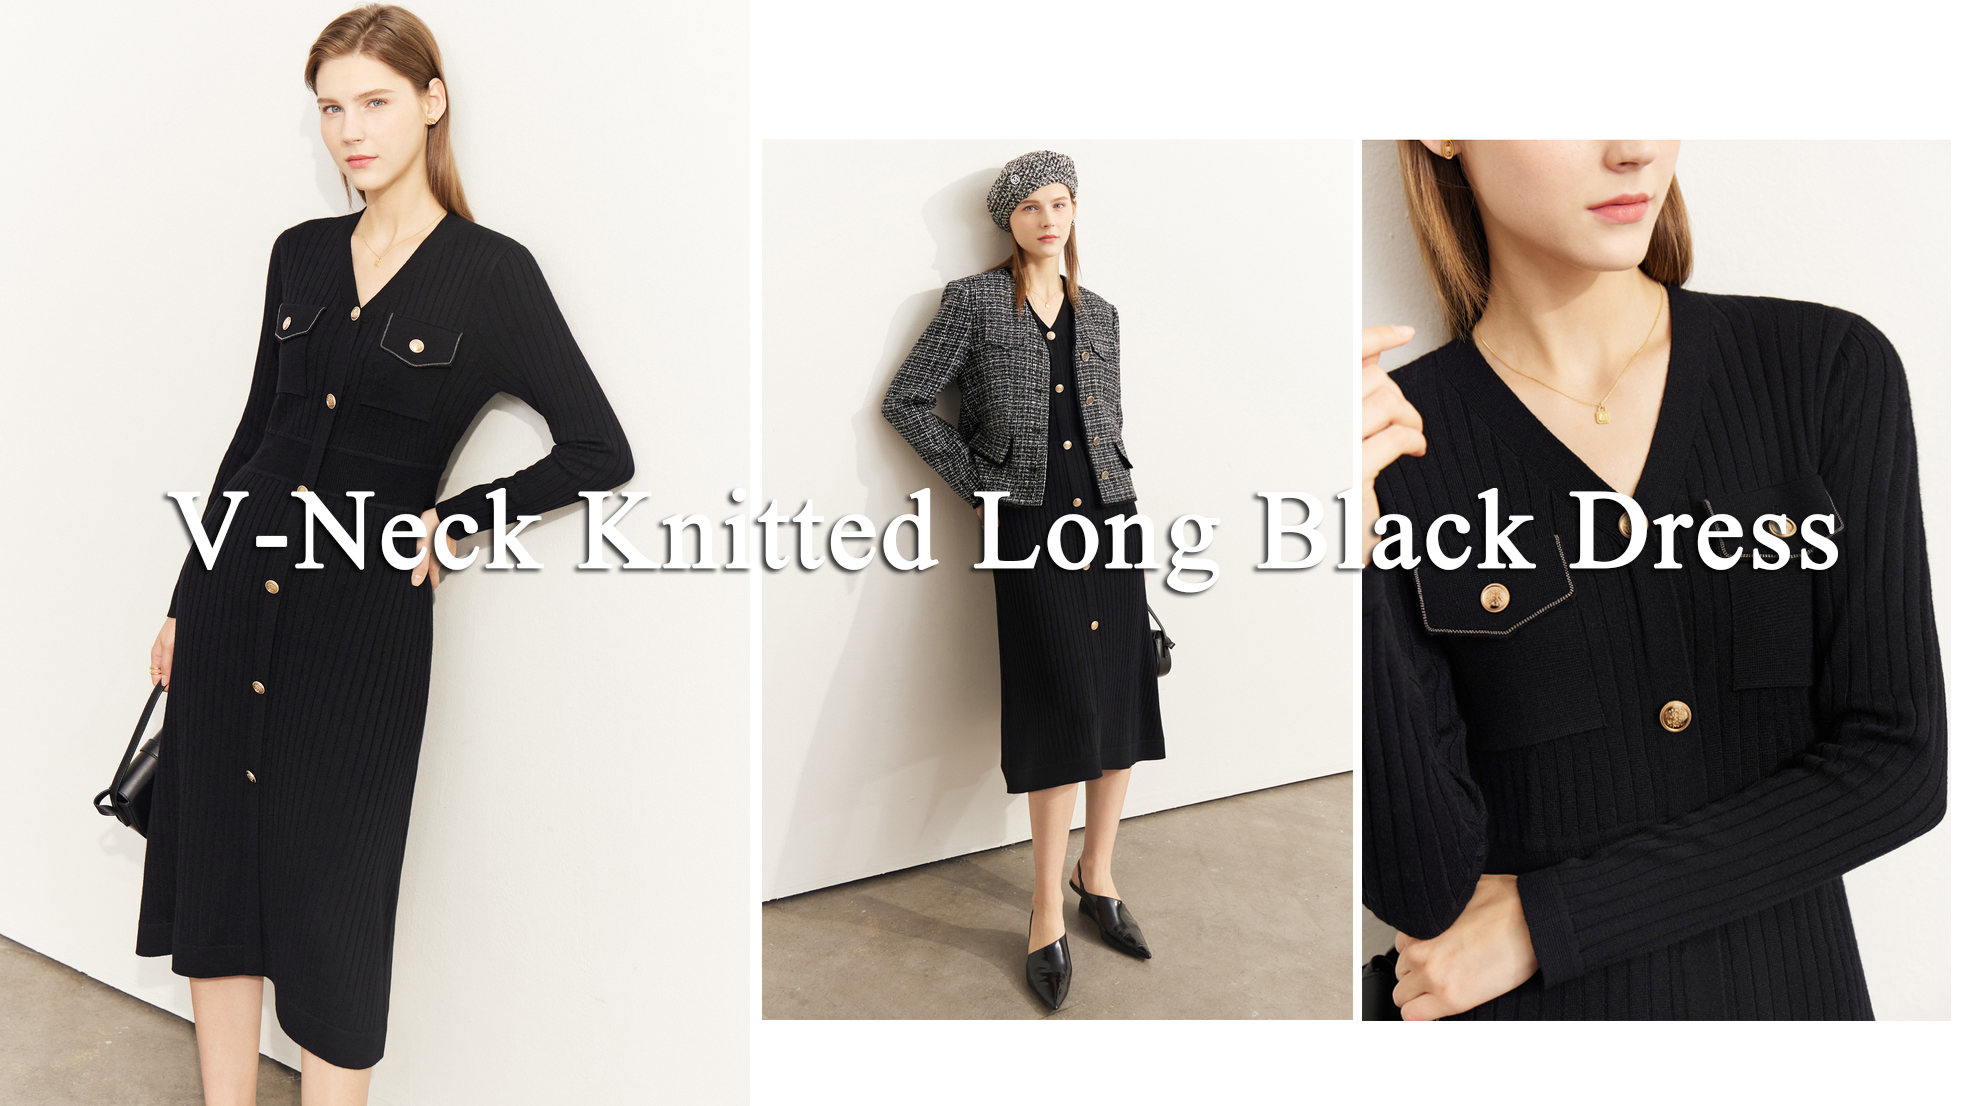 Customized V-Neck Knitted Long Black Dress manufacturers From China | Auschalink